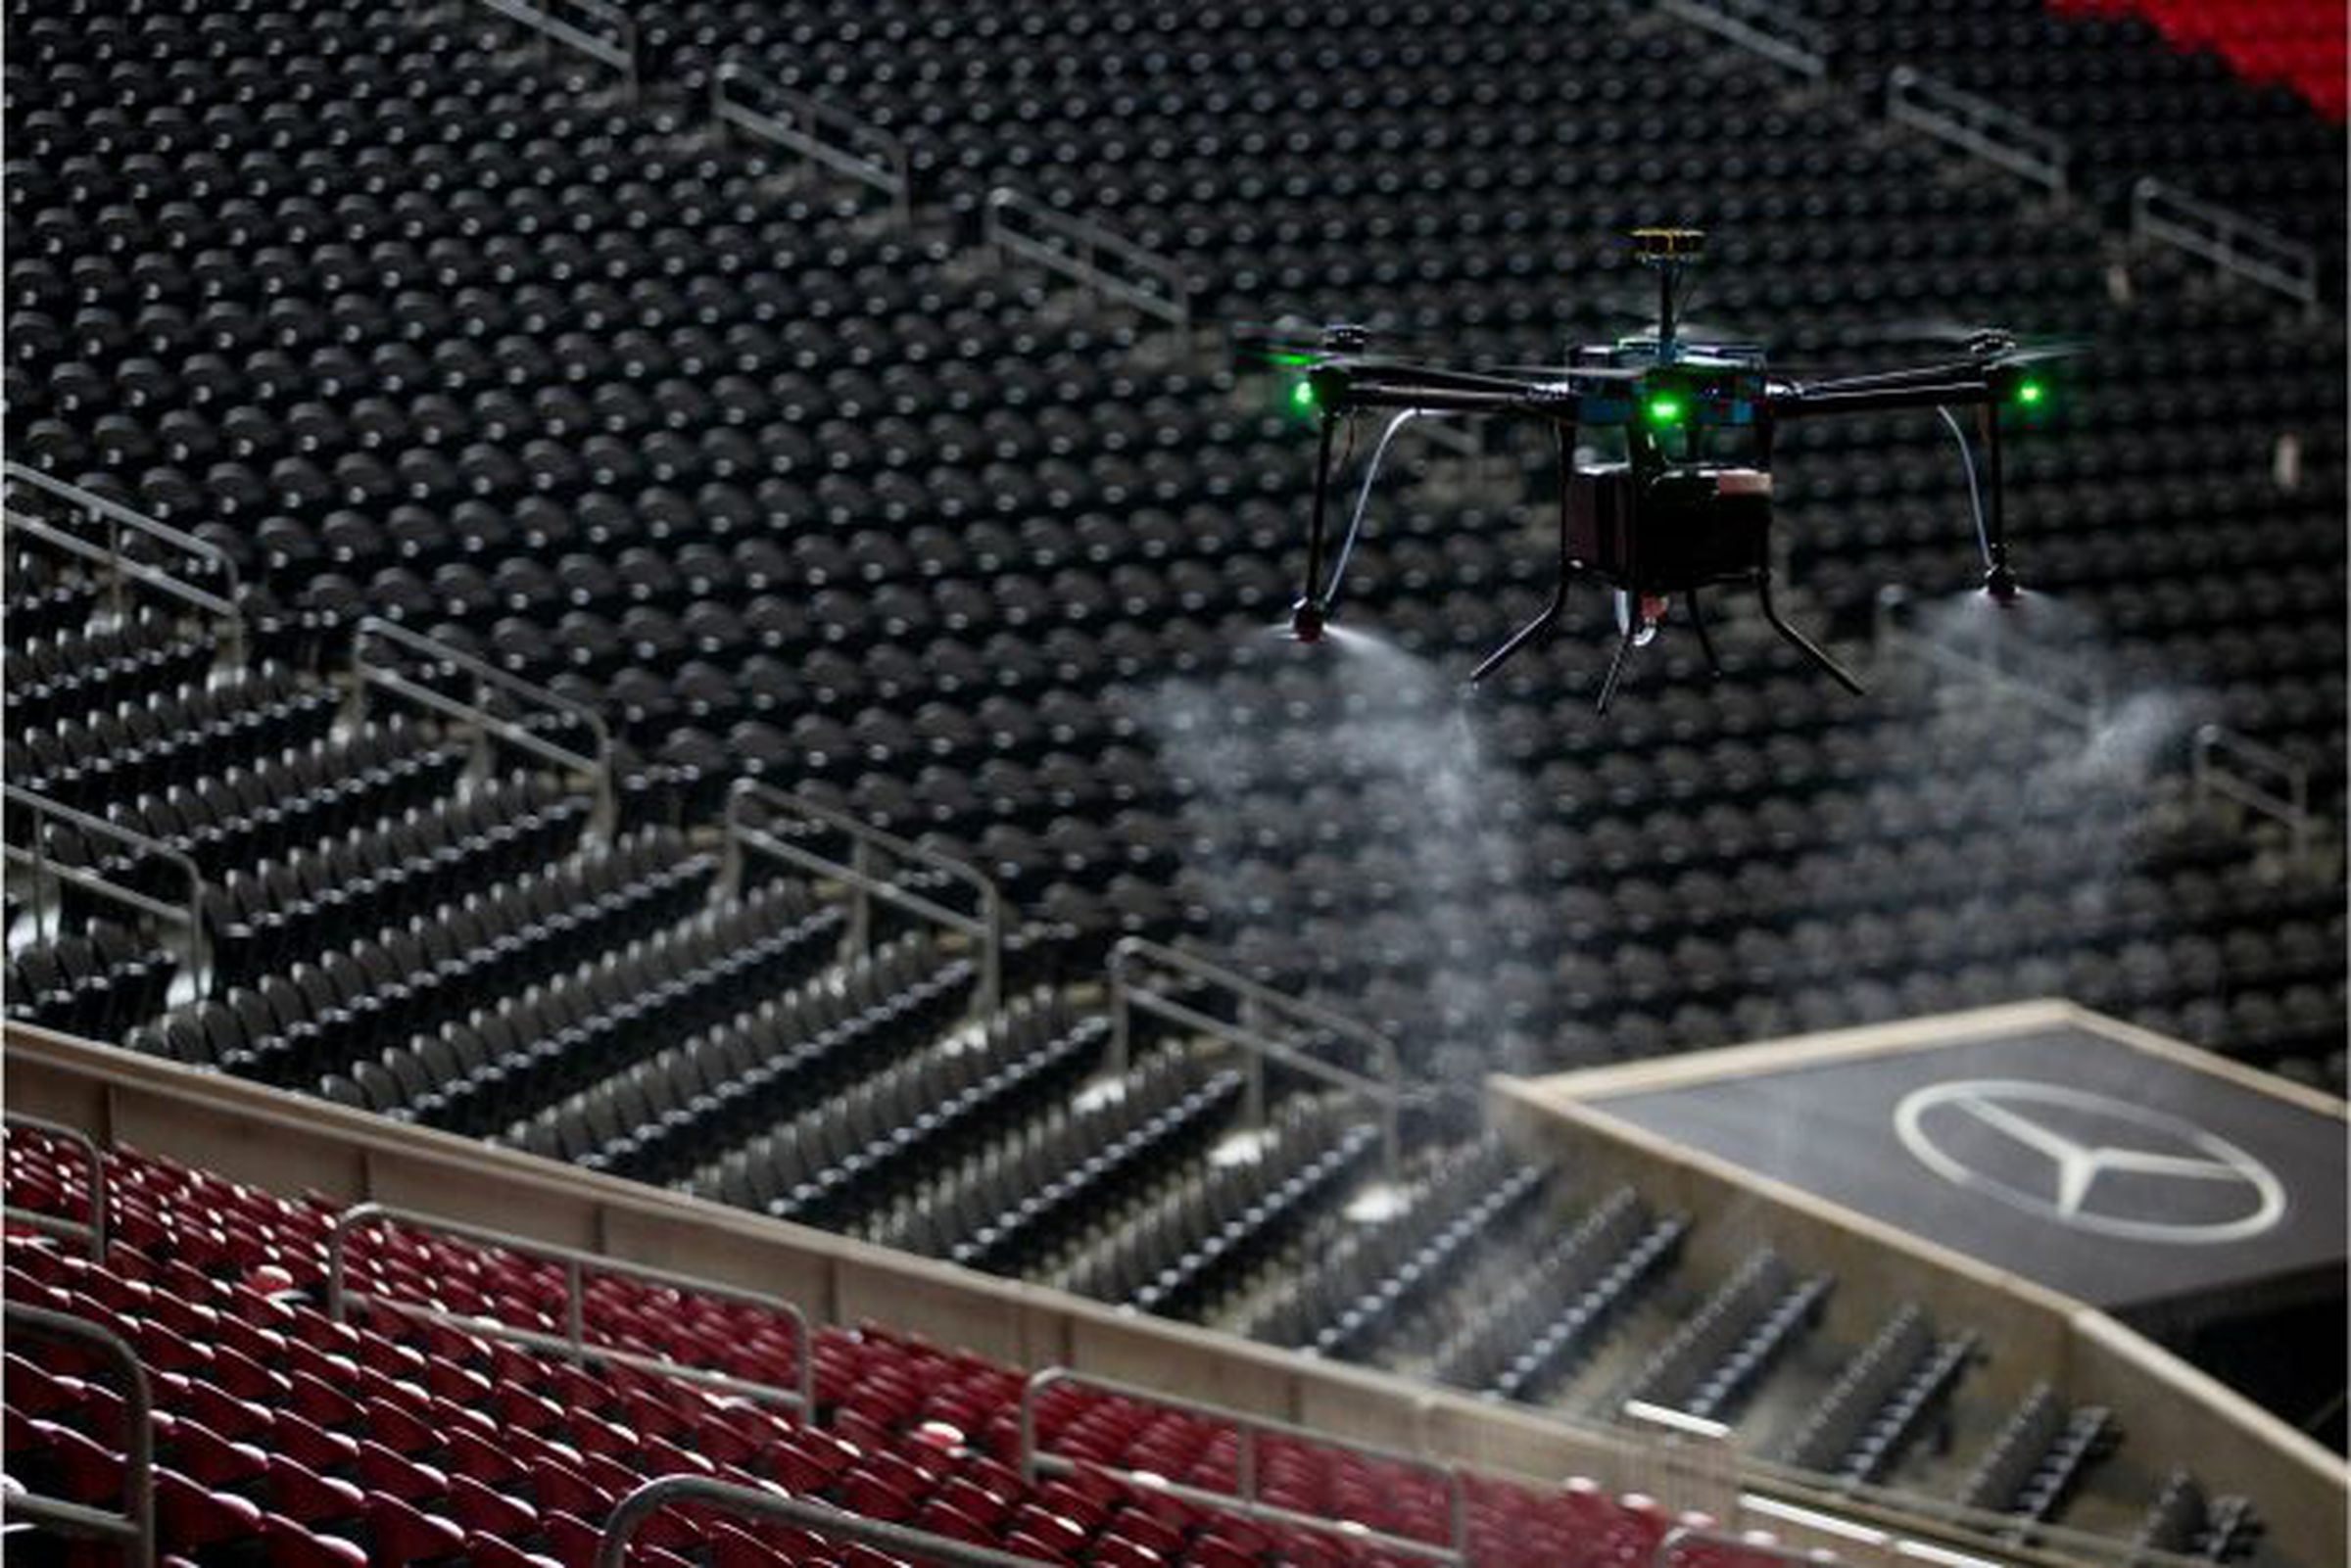 The drones will spray seating areas, handrails, and glass partitions.